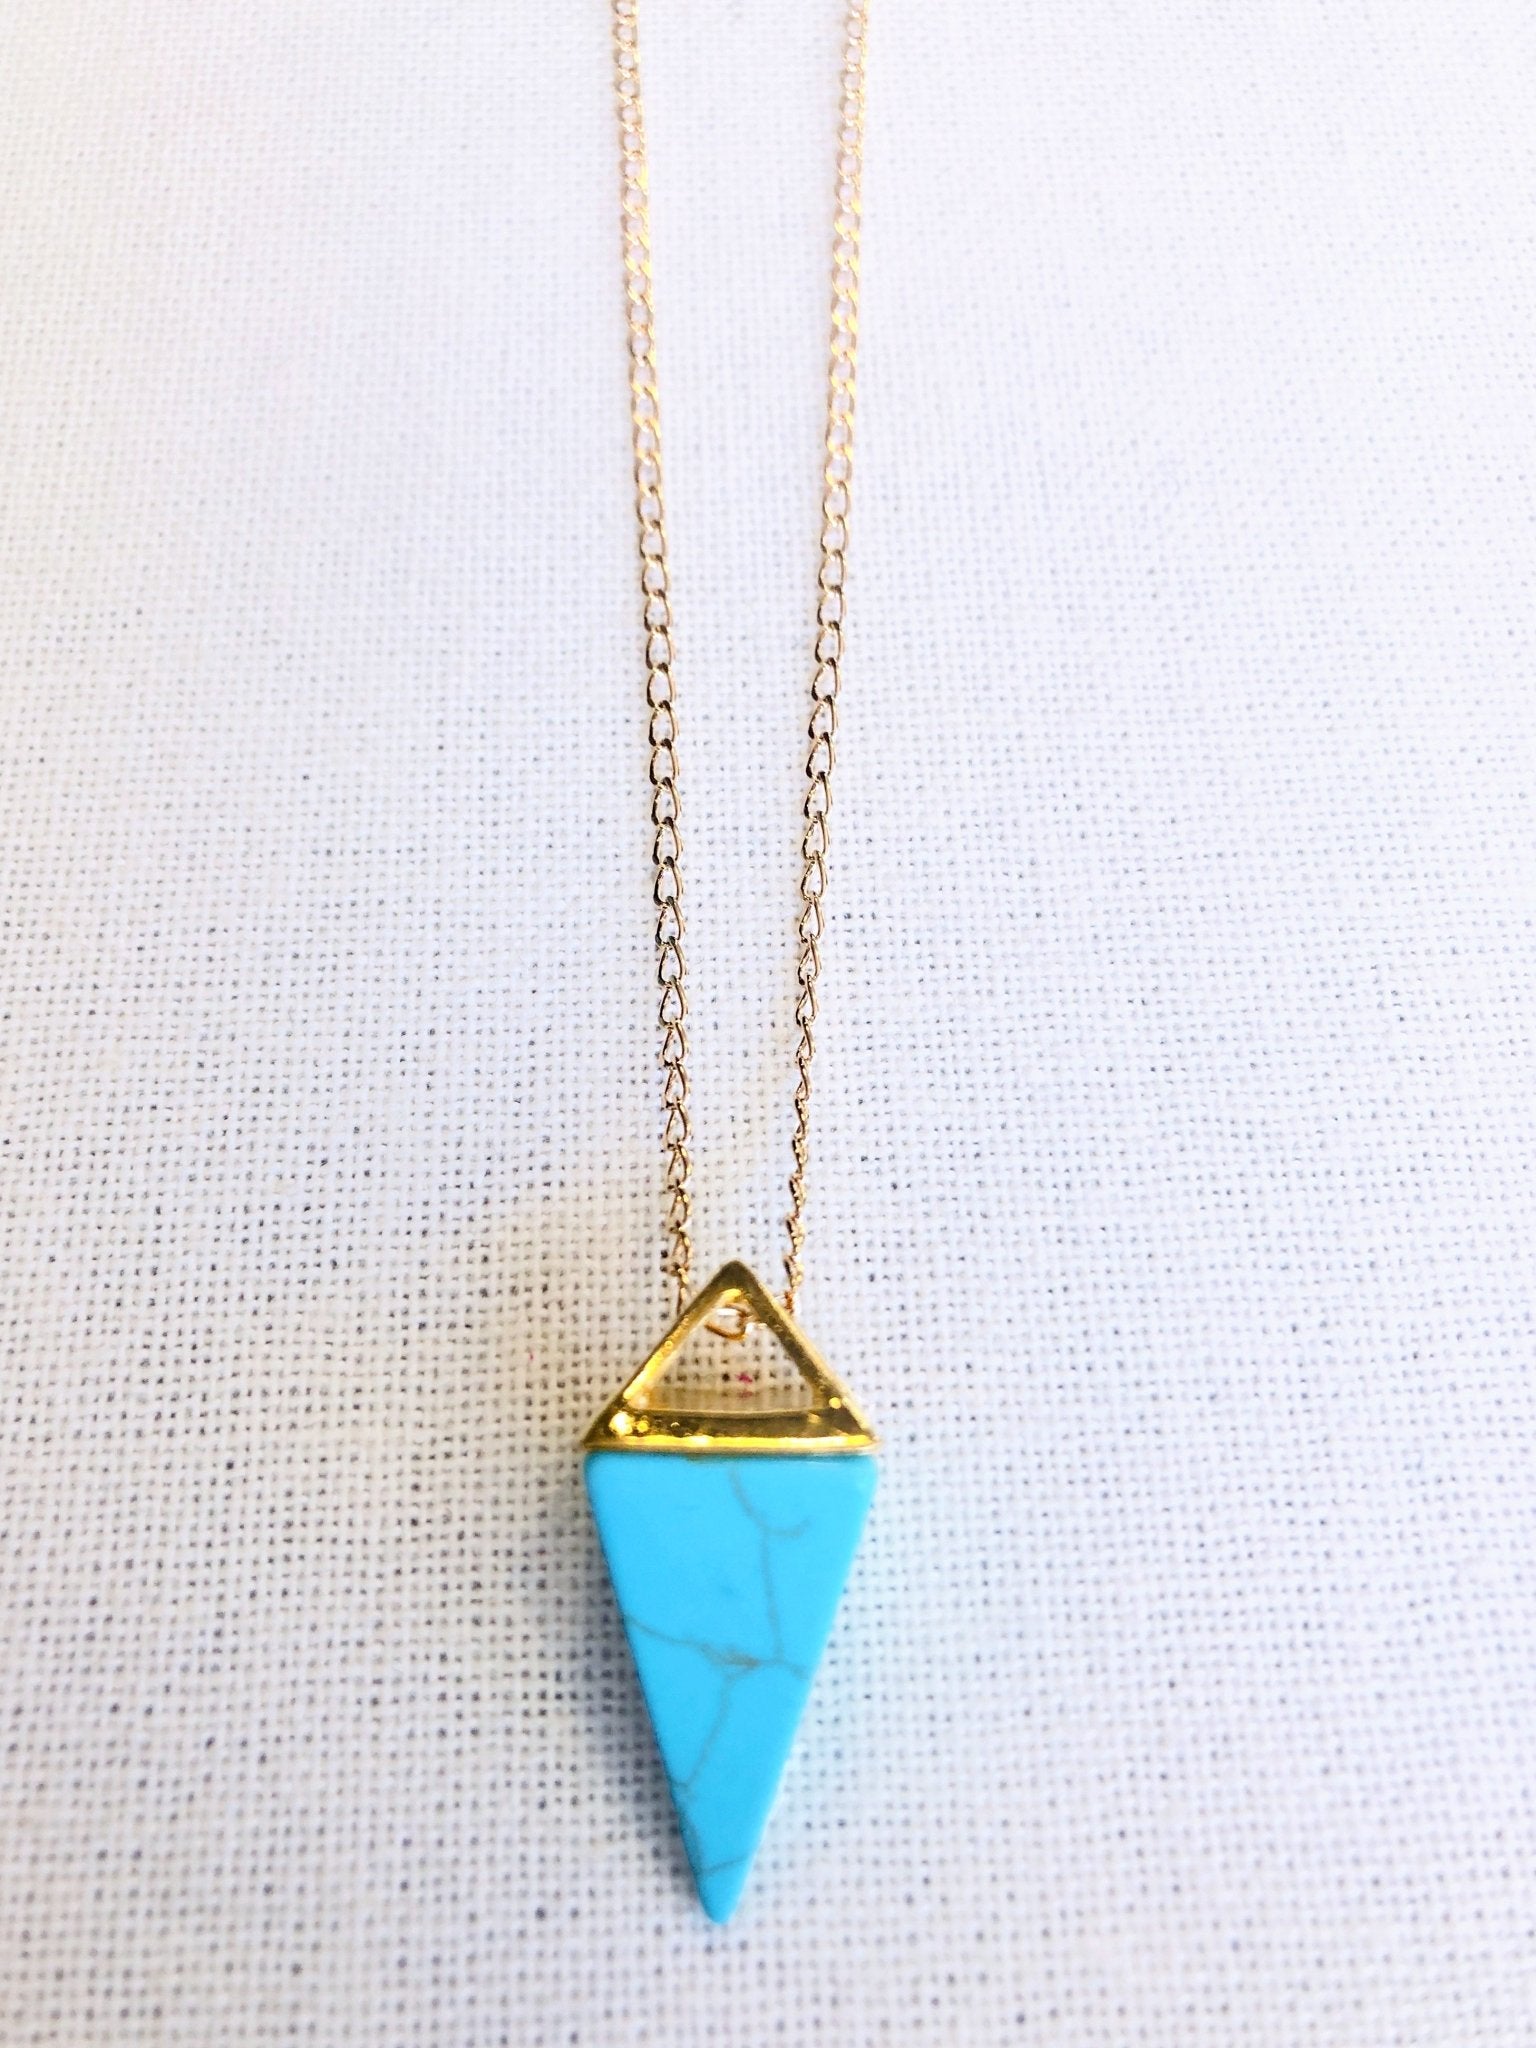 Turquoise Howlite Pyramid Drop Necklace by Sage Machado, Turquoise Howlite Pyramid Drop Gold Necklace - The Sage Lifestyle